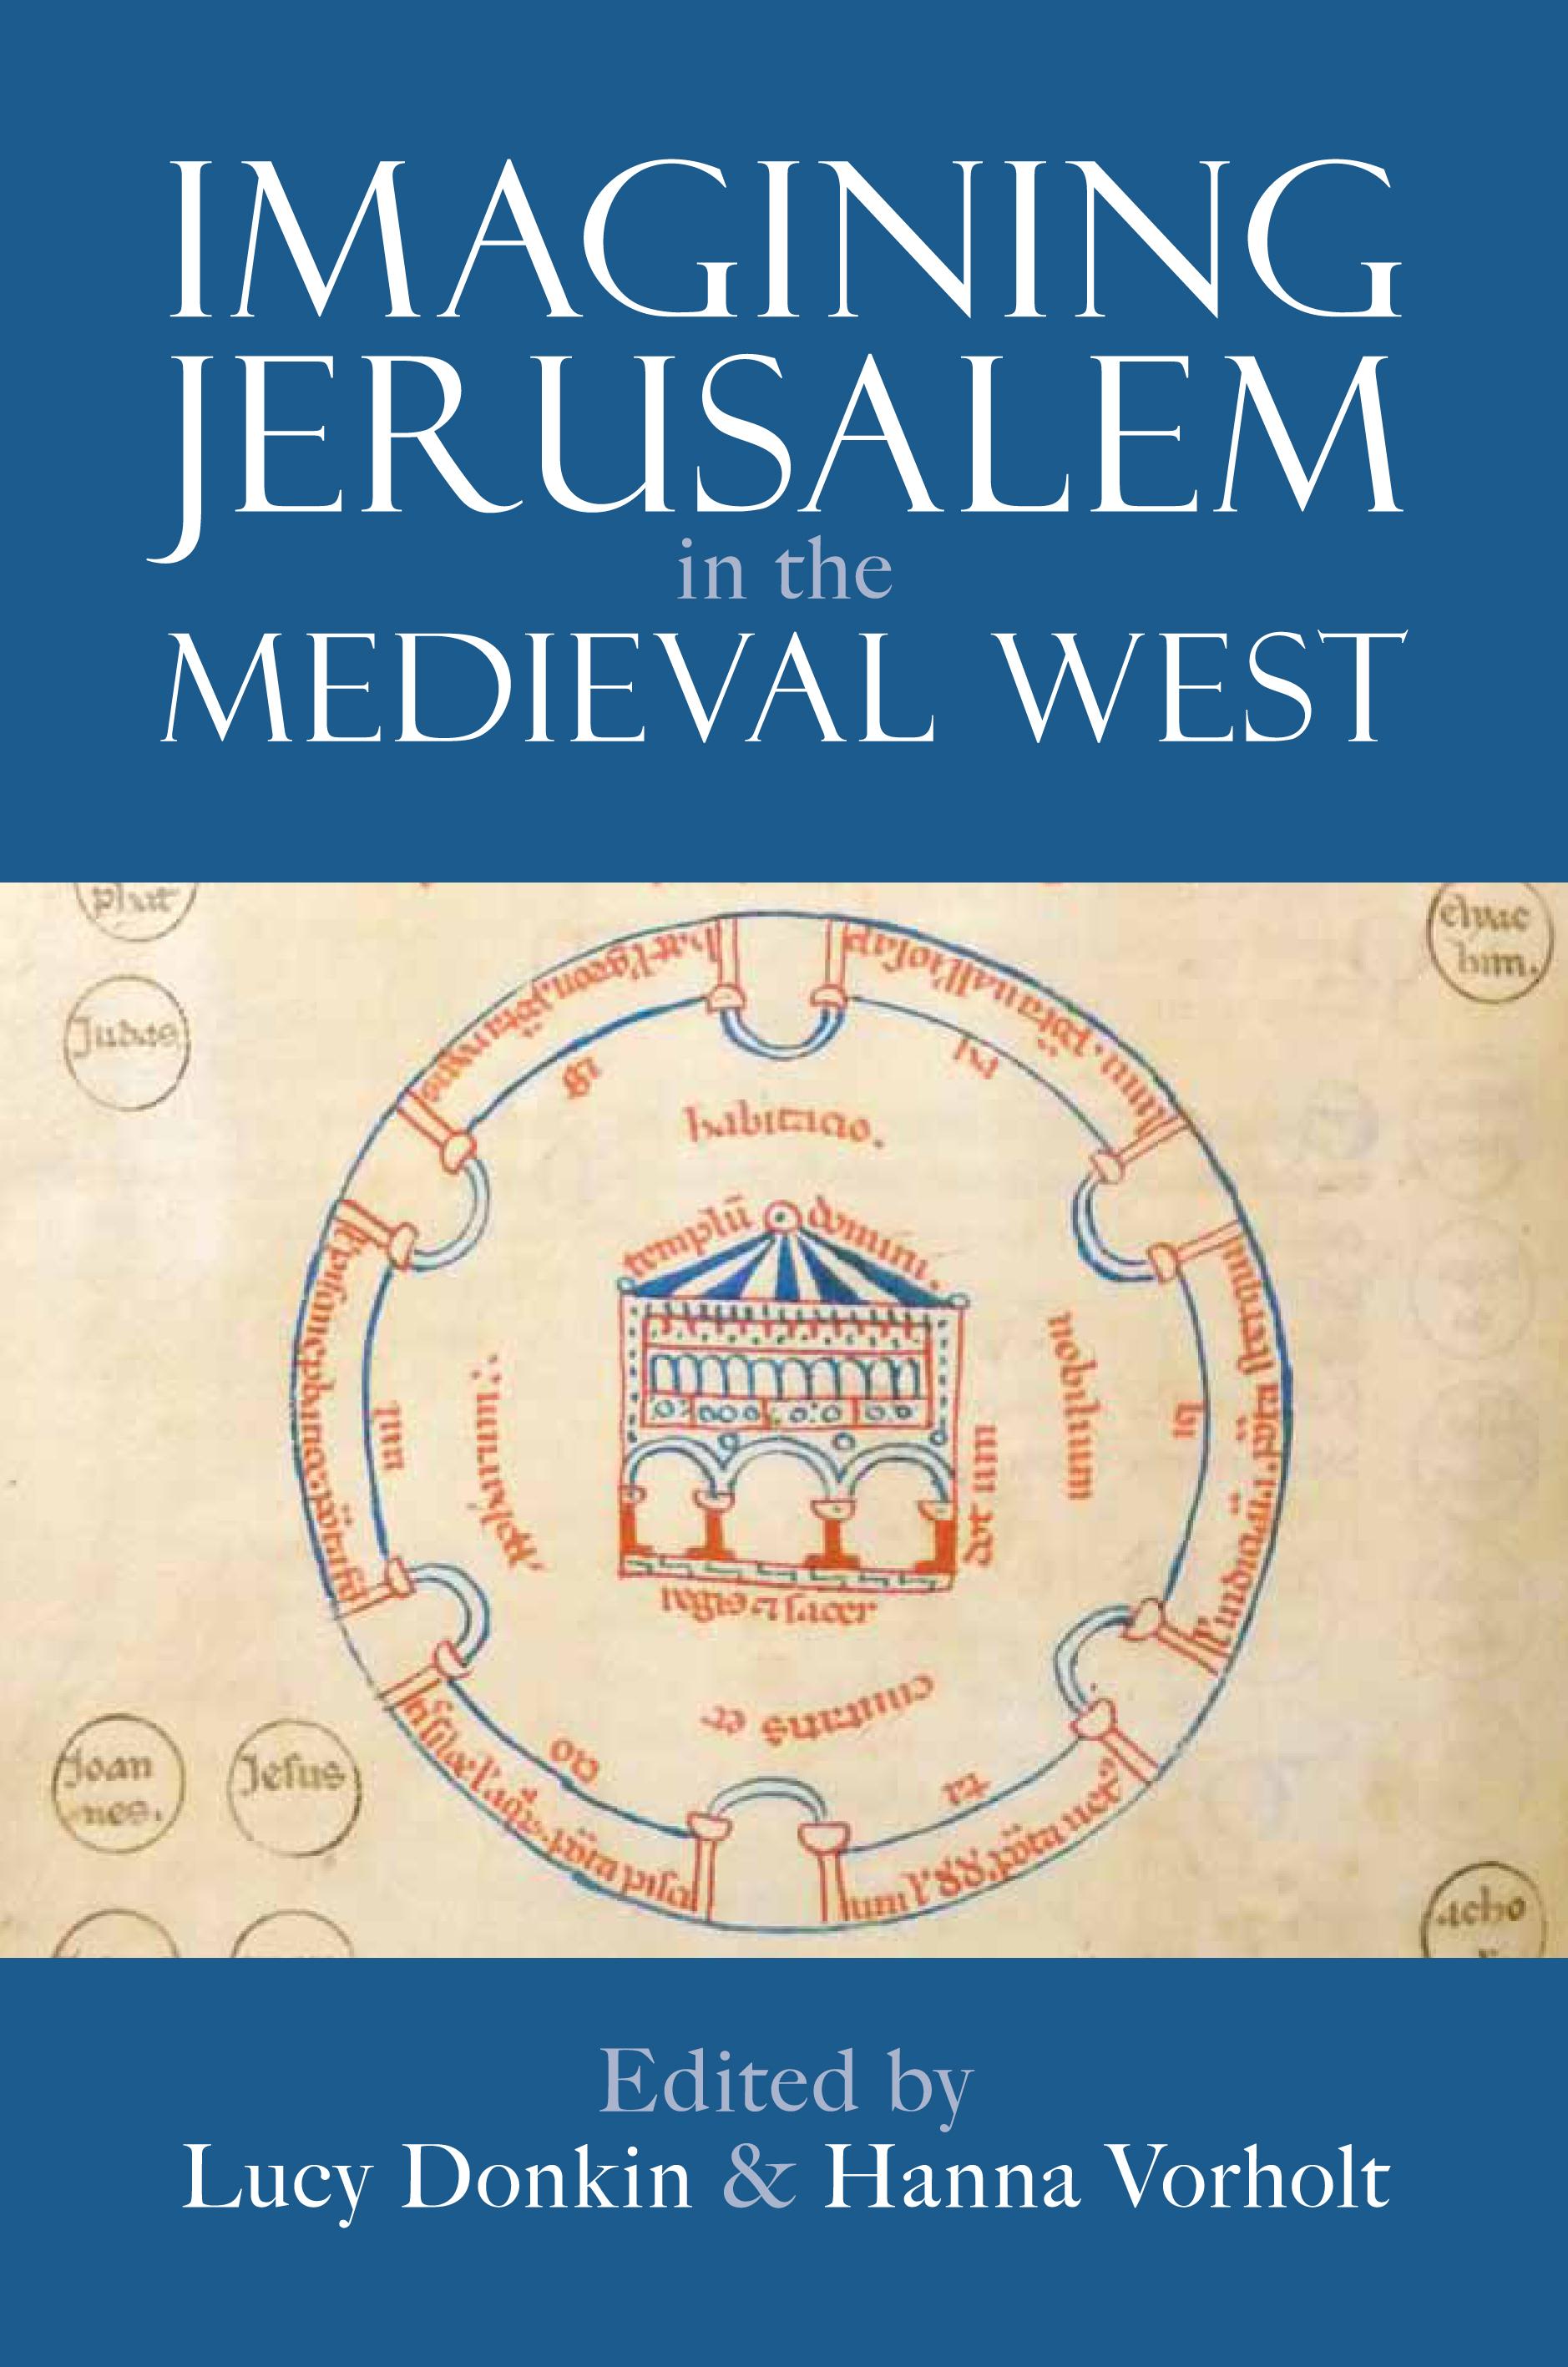 Dr Lucy Donkin has co-edited a new book entitled "Imagining Jerusalem in the Medieval West"